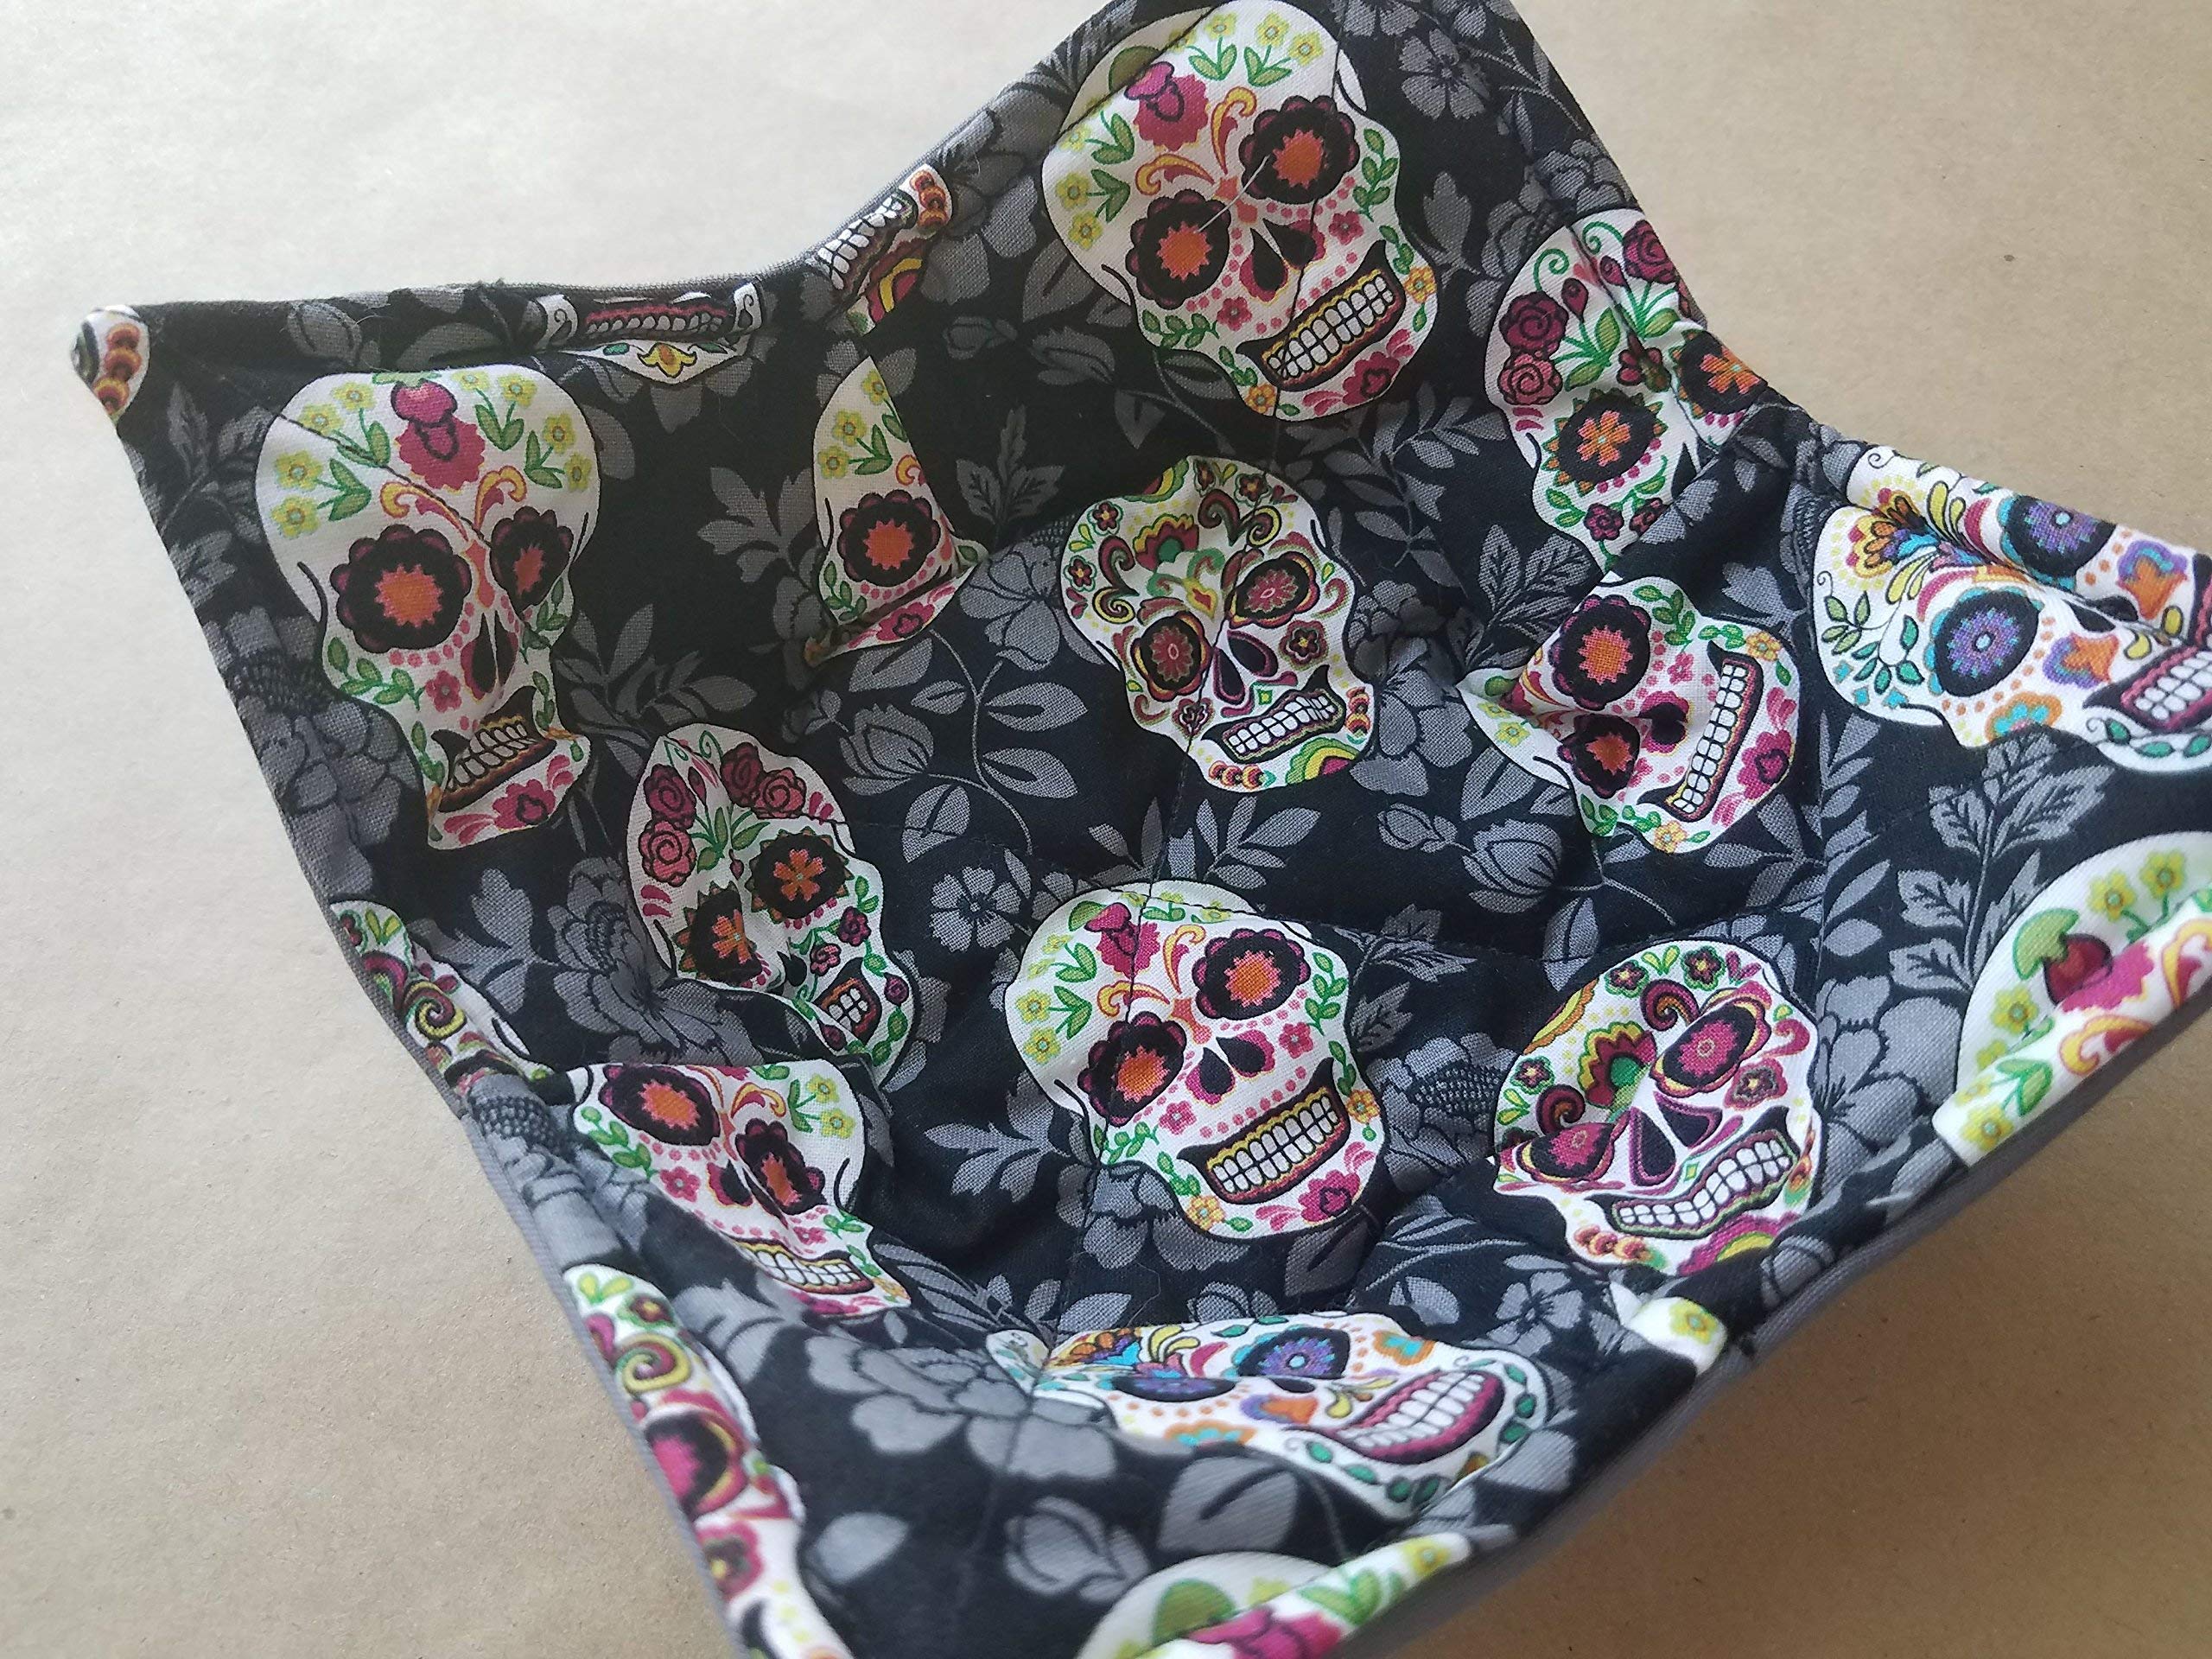 Sugar Skull Microwave Bowl Cozy Día de Muertos Reversible Microwaveable Pot Holder Day of the Dead Bowl Holder Day of the Dead Kitchen Linens Skull Home Decor Gifts Under 10 Halloween Hostess Gift